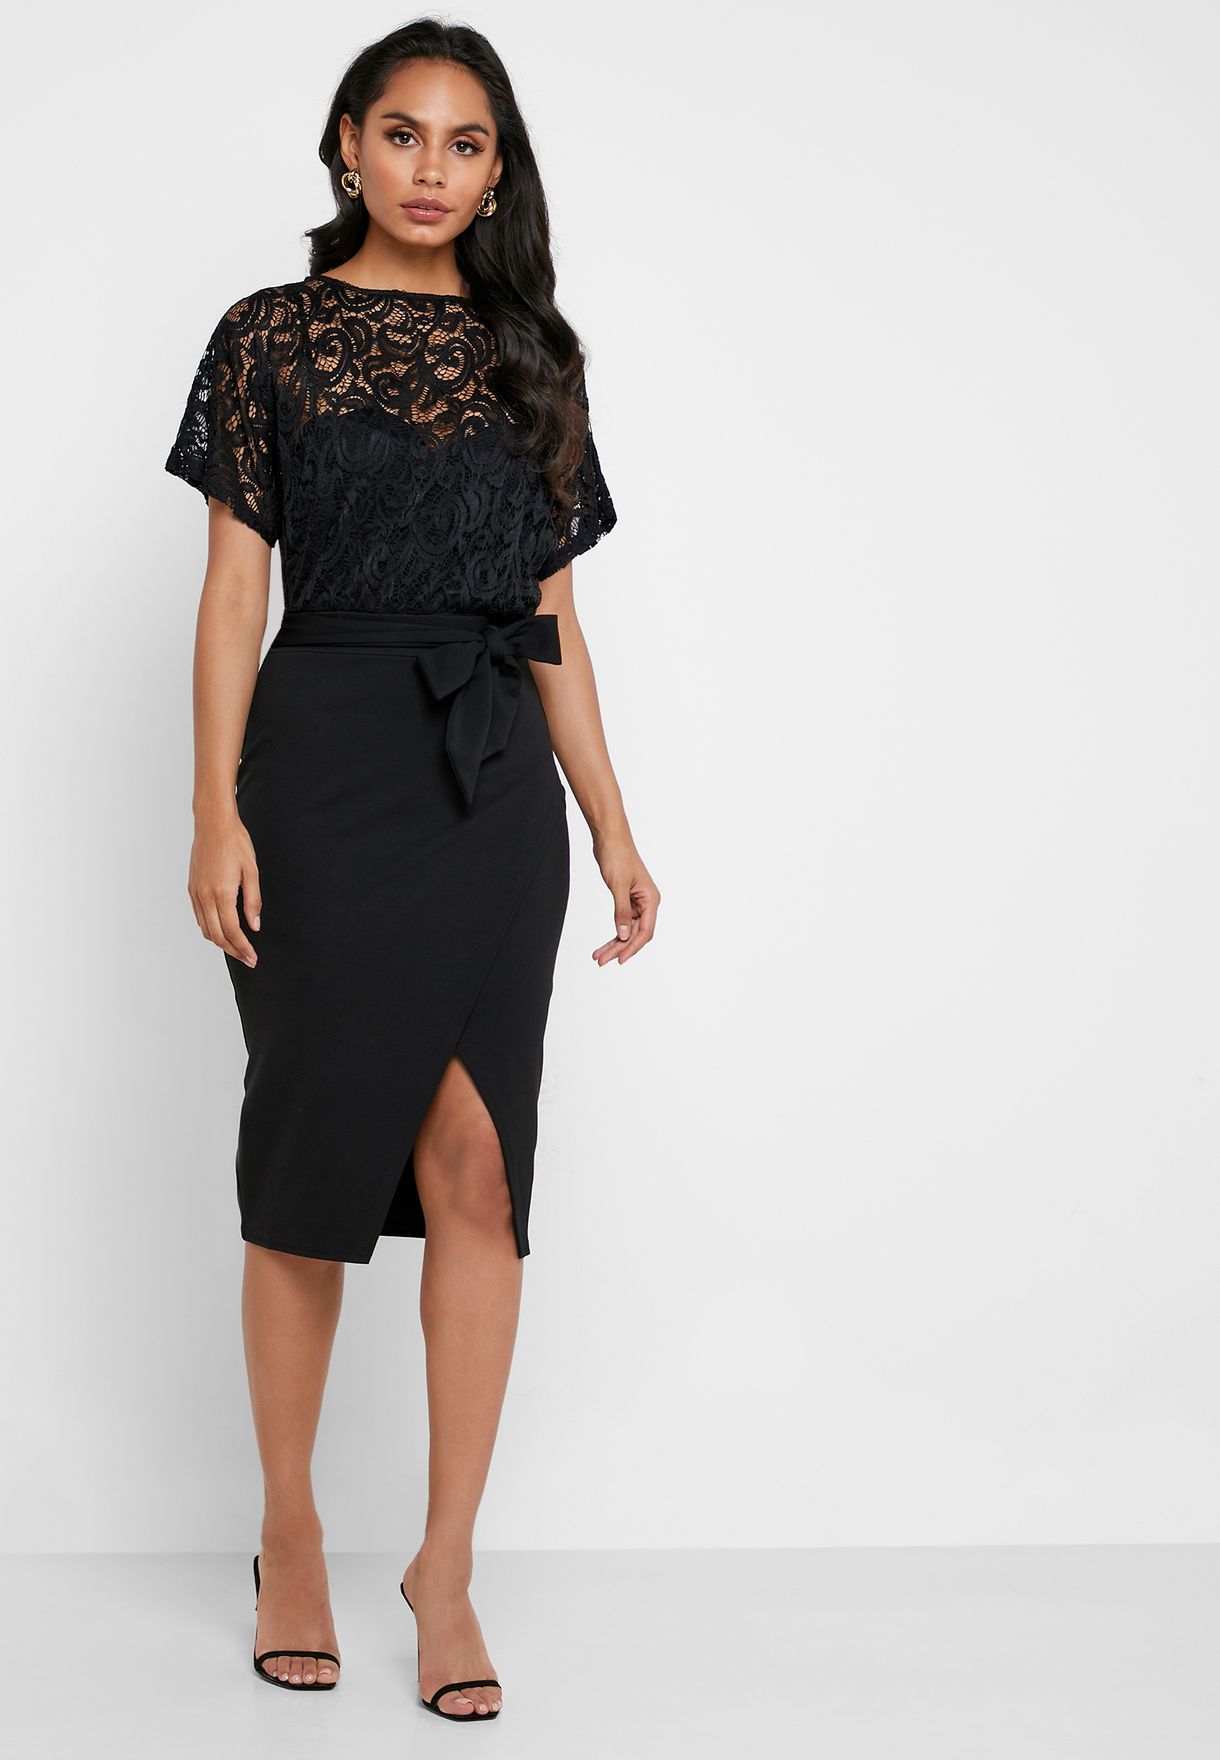 Buy Quiz black Sheer Lace Dress for 